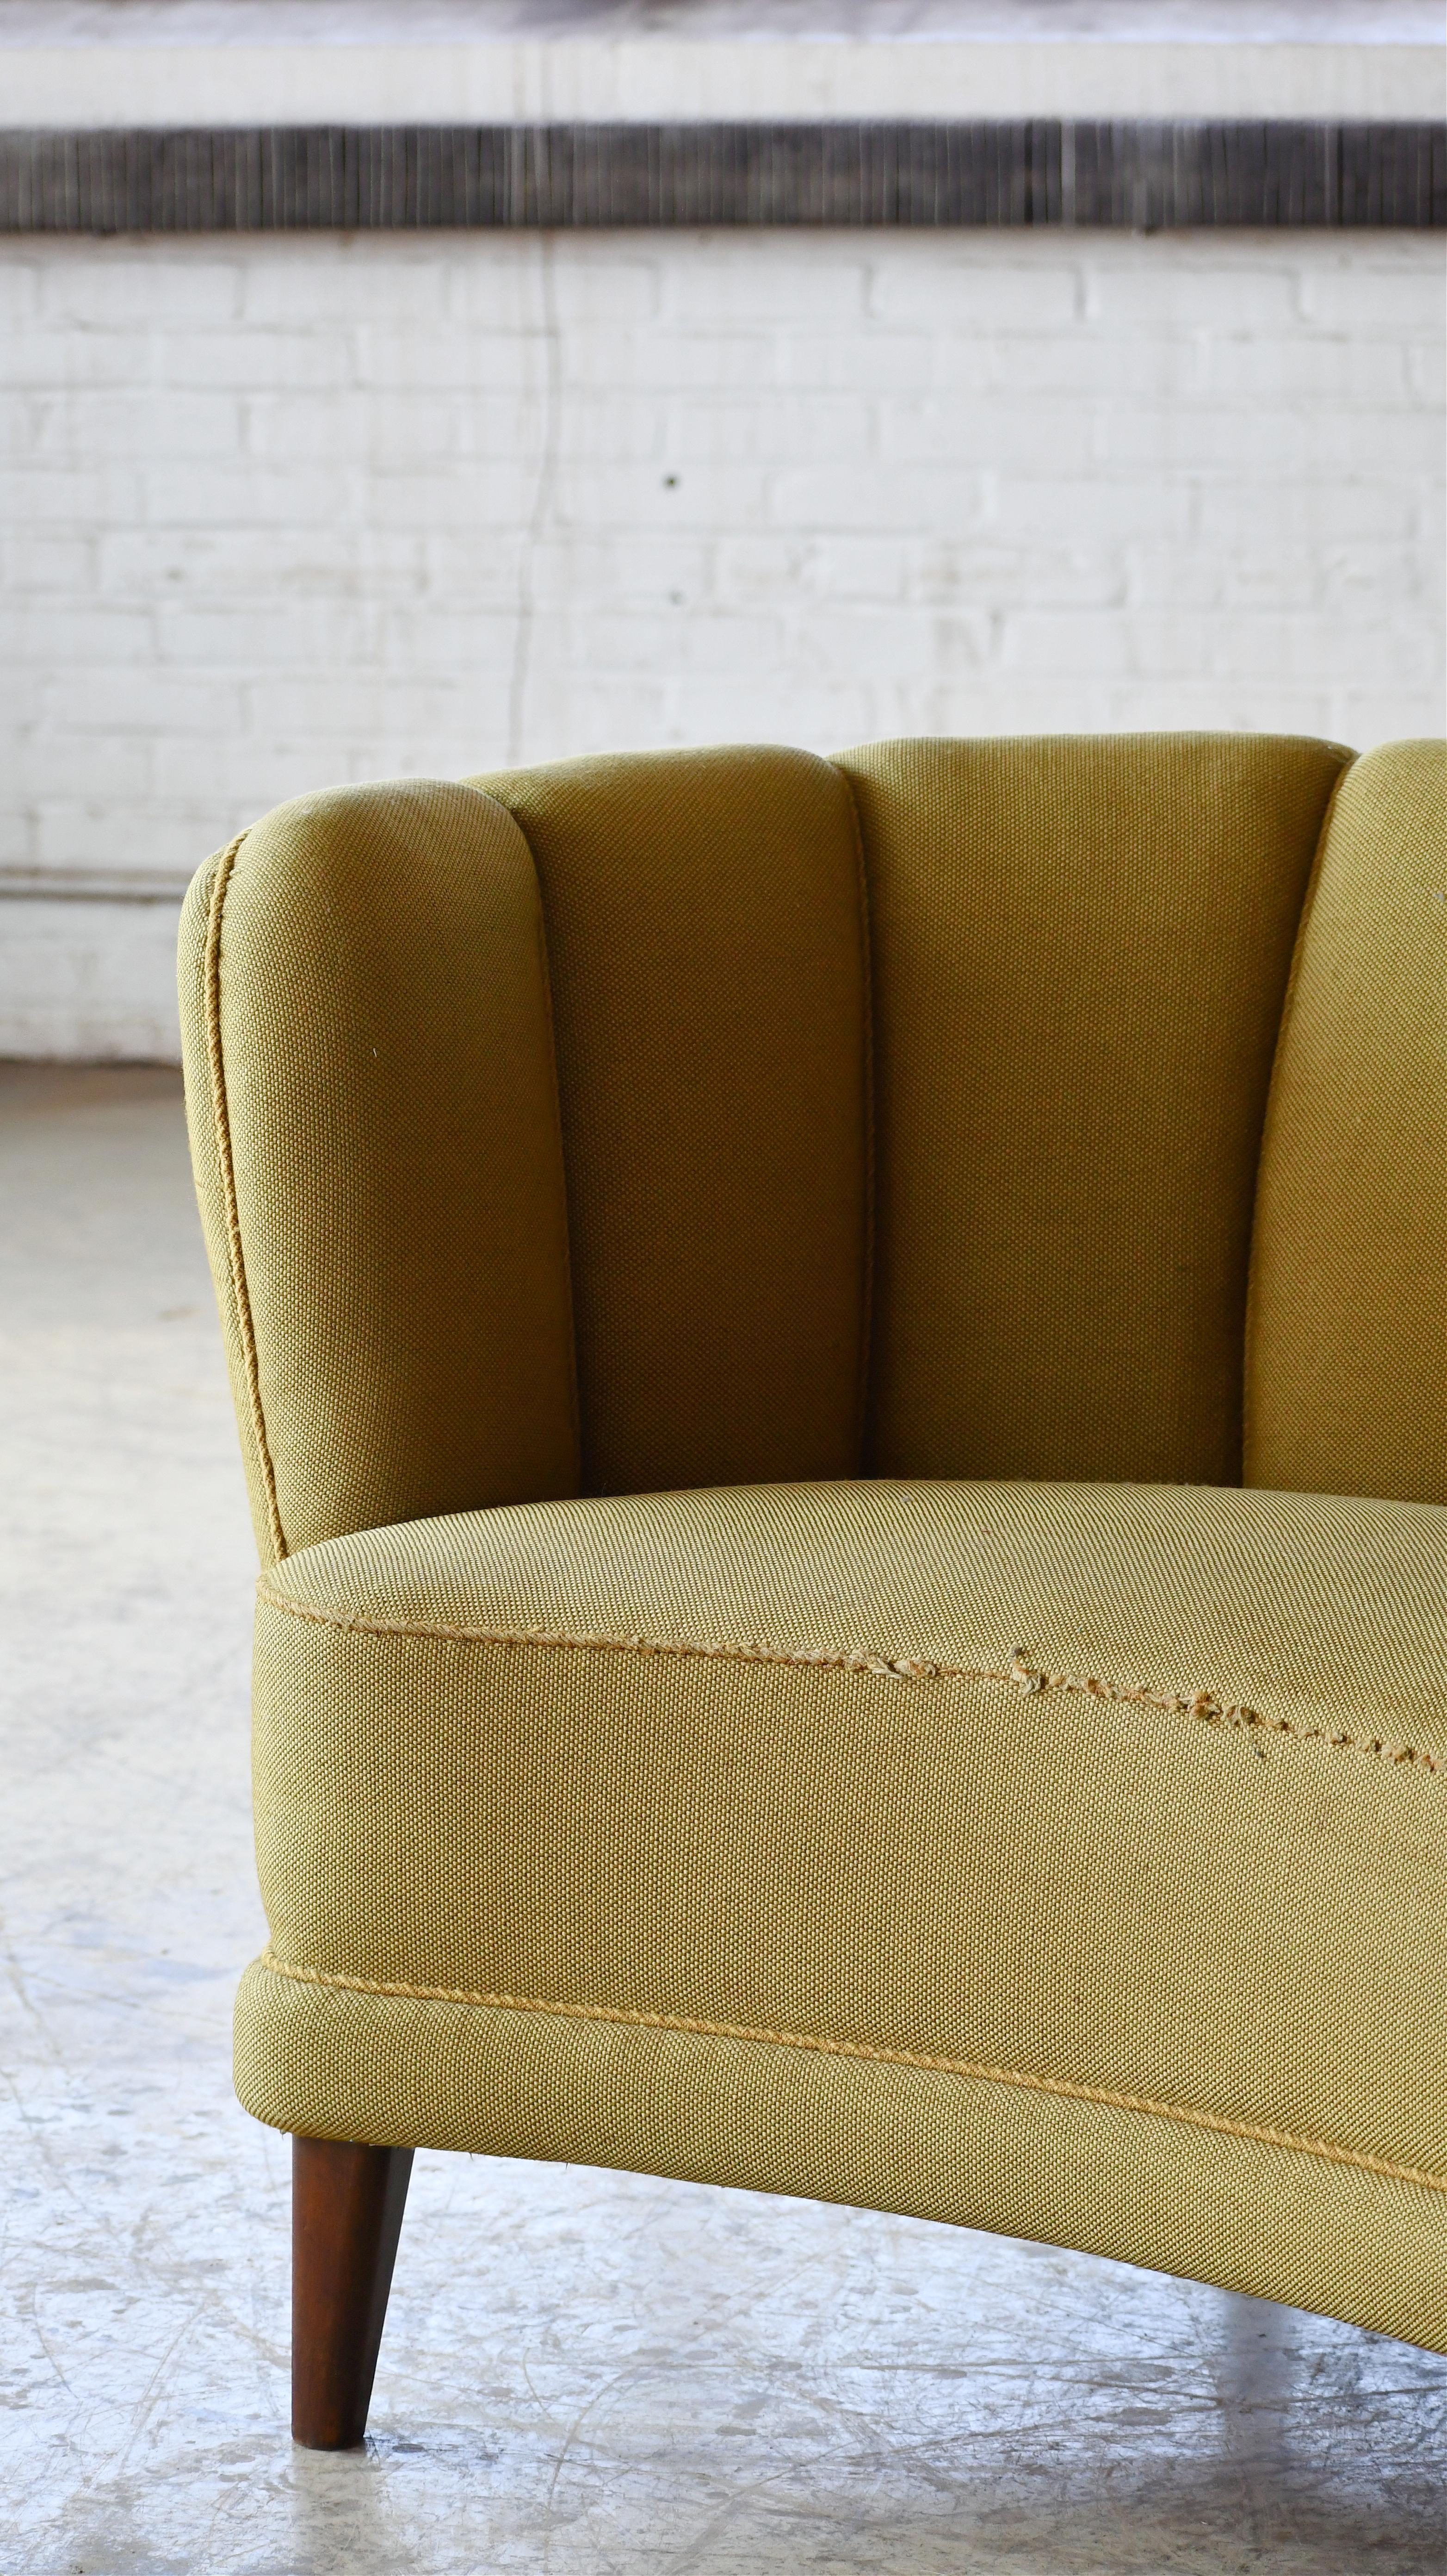 Curved Banana Shape Loveseat or Sofa in Two-Tone Wool, Denmark, 1940s For Sale 3